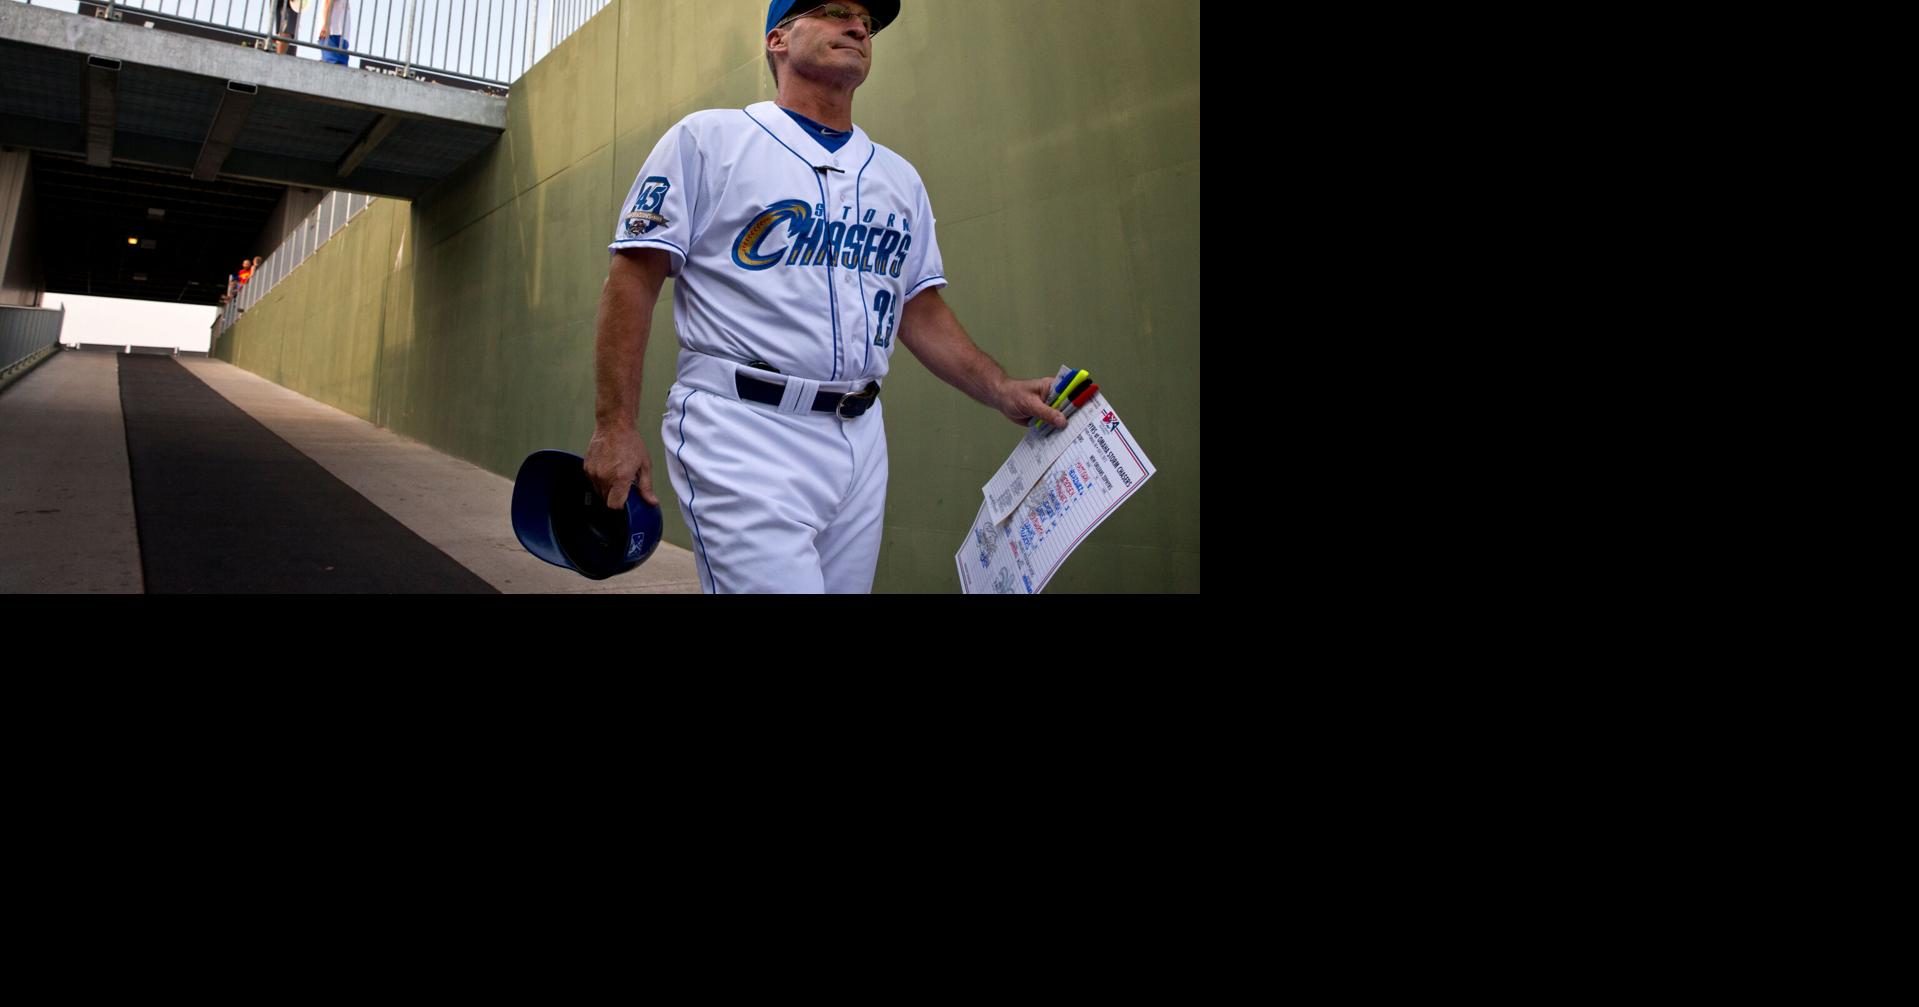 Personnel news: Omaha Storm Chasers, Kingsport Axmen